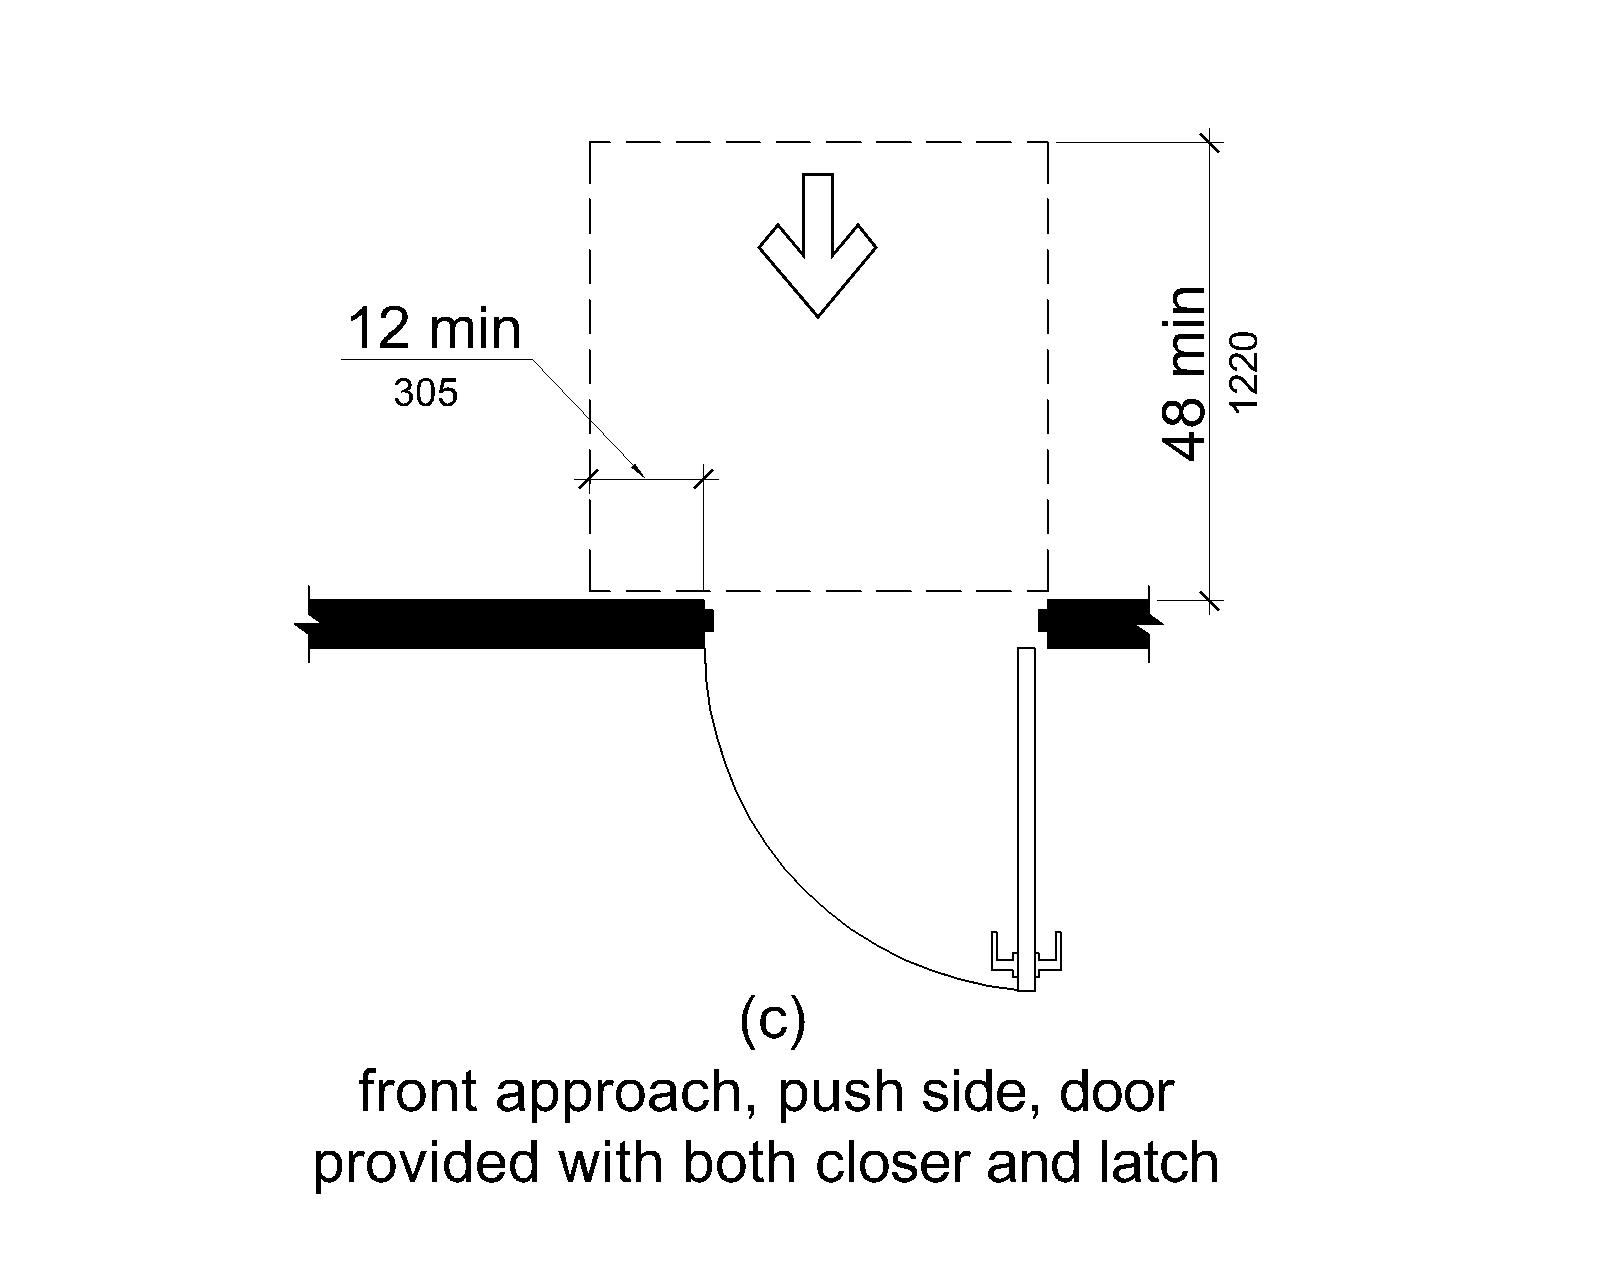 (c) At doors equipped with both a closer and a latch, the maneuvering space extends 12 inches (305 mm) minimum beyond the latch side of the door and 48 inches (1220 mm) minimum perpendicular to the doorway.